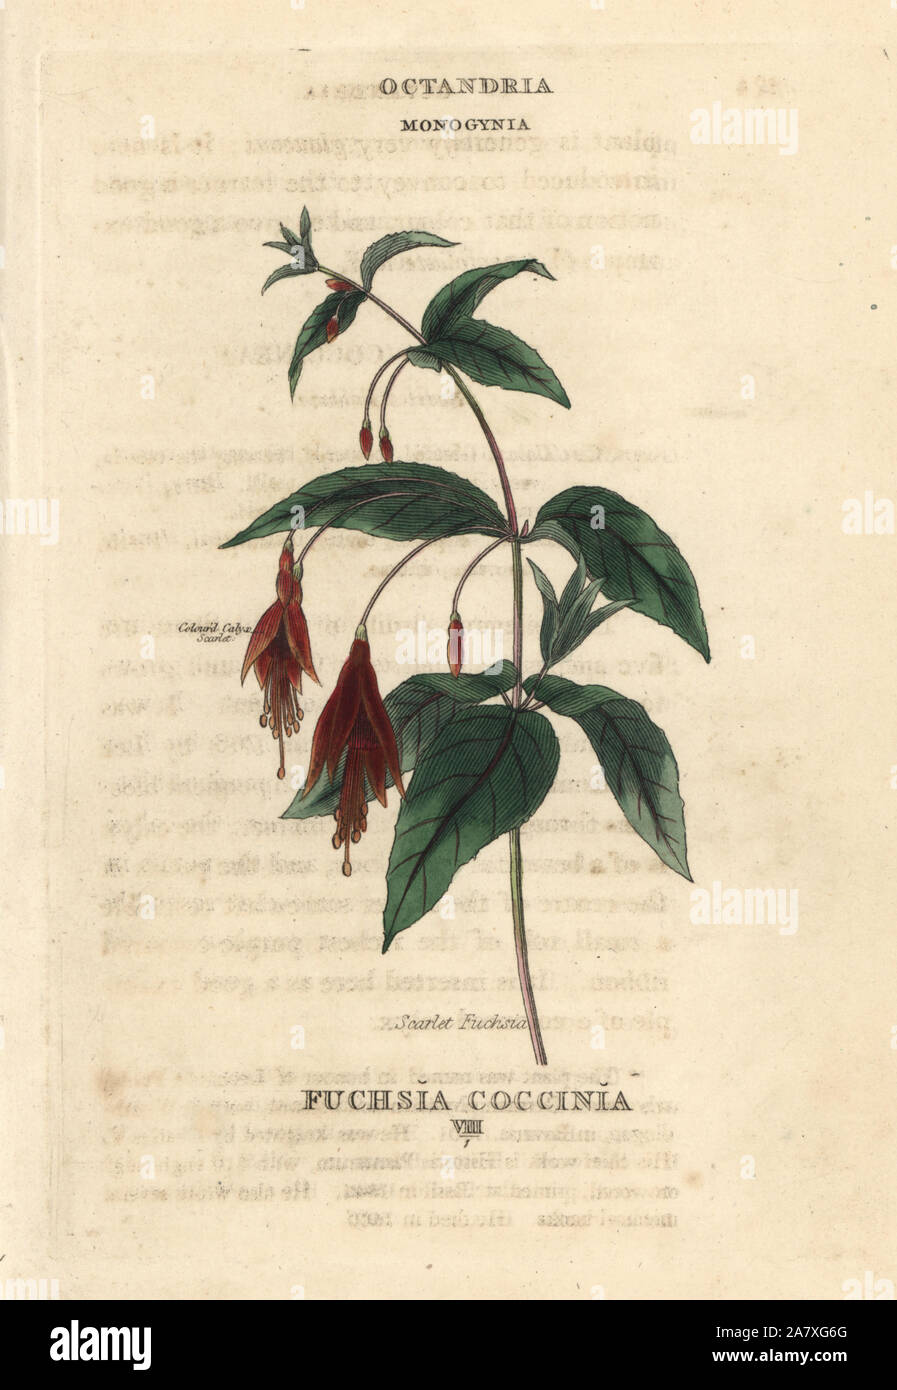 Scarlet fuchsia, Fuchsia coccinea (Fuchsia coccinia). Handcoloured copperplate engraving after an illustration by Richard Duppa from his The Classes and Orders of the Linnaean System of Botany, Longman, Hurst, London, 1816. Stock Photo